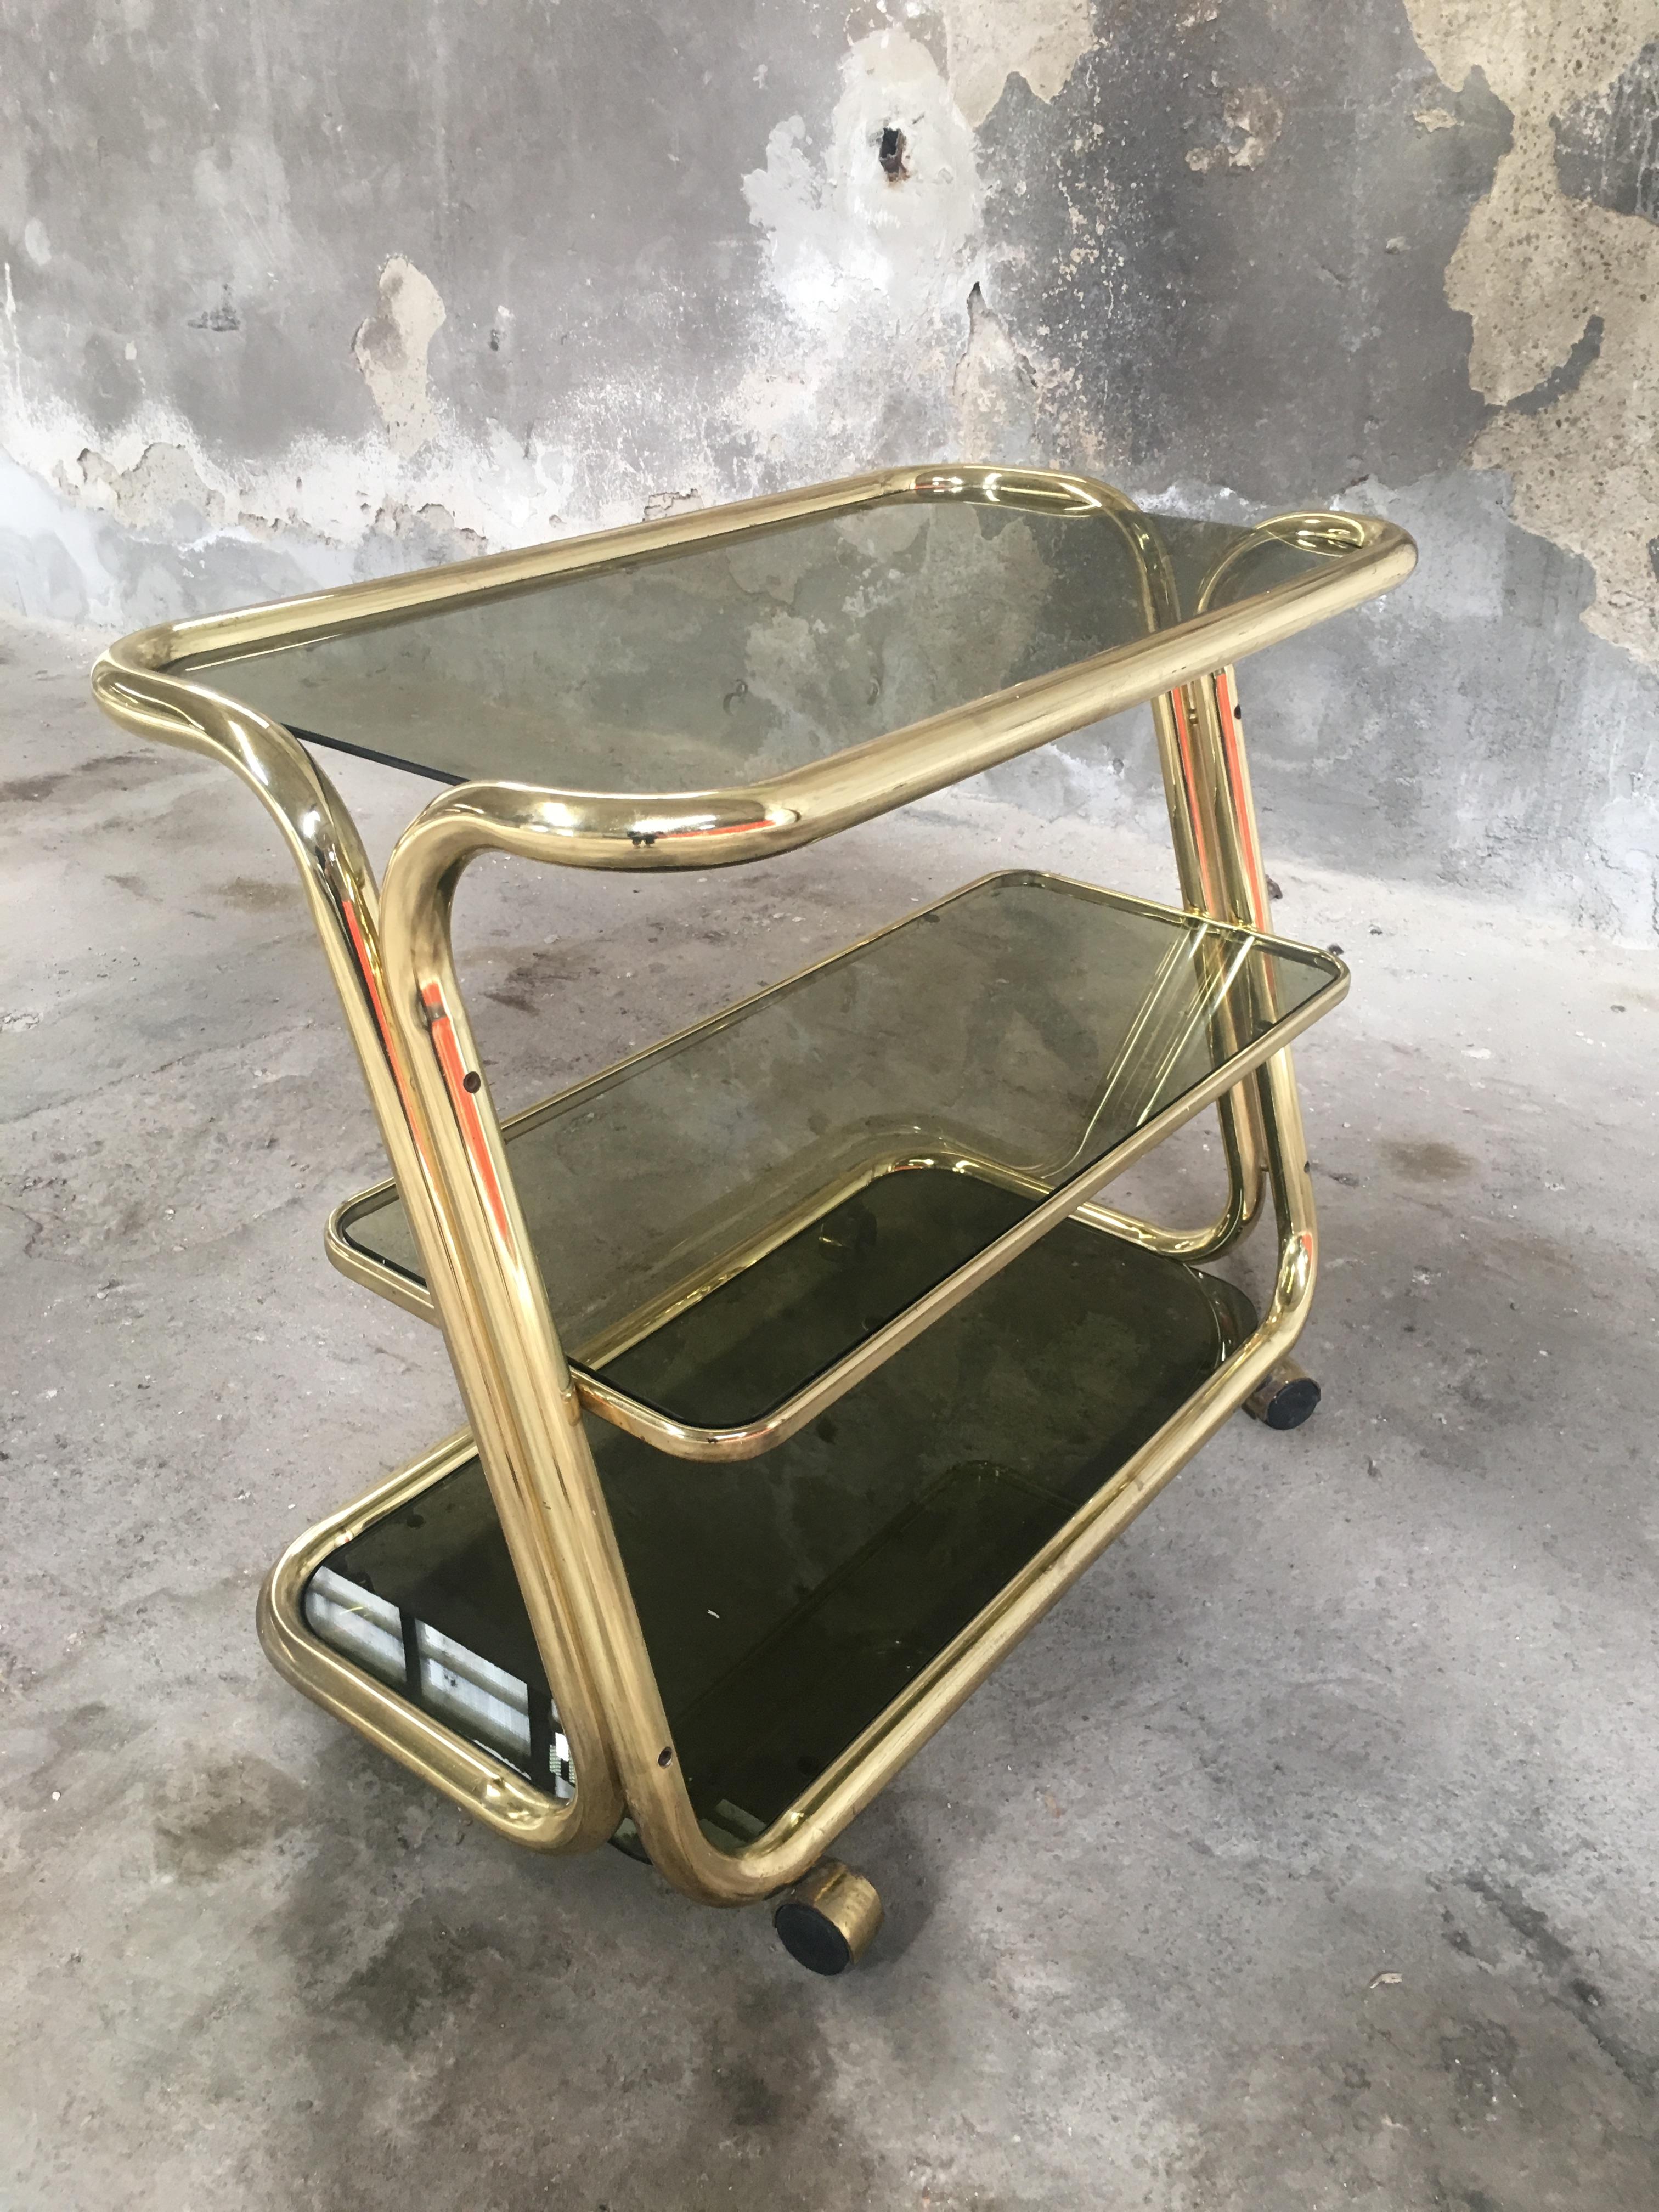 Late 20th Century Midcentury Italian Brass Metal Bar Cart with Smoked Glass Shelves from 1970s